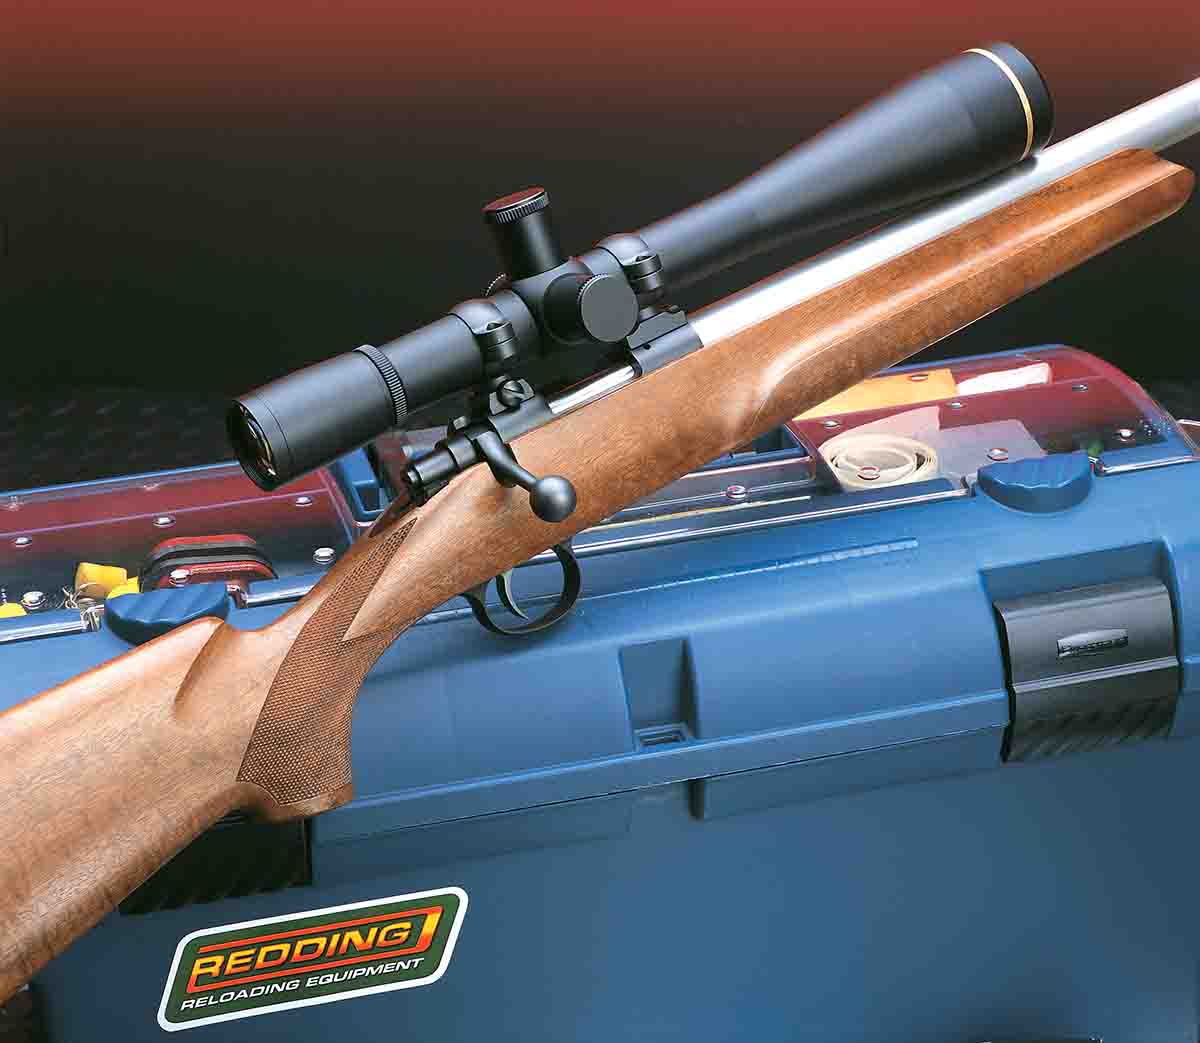 The Cooper rifle is outfitted with a 40x Leupold Competition scope